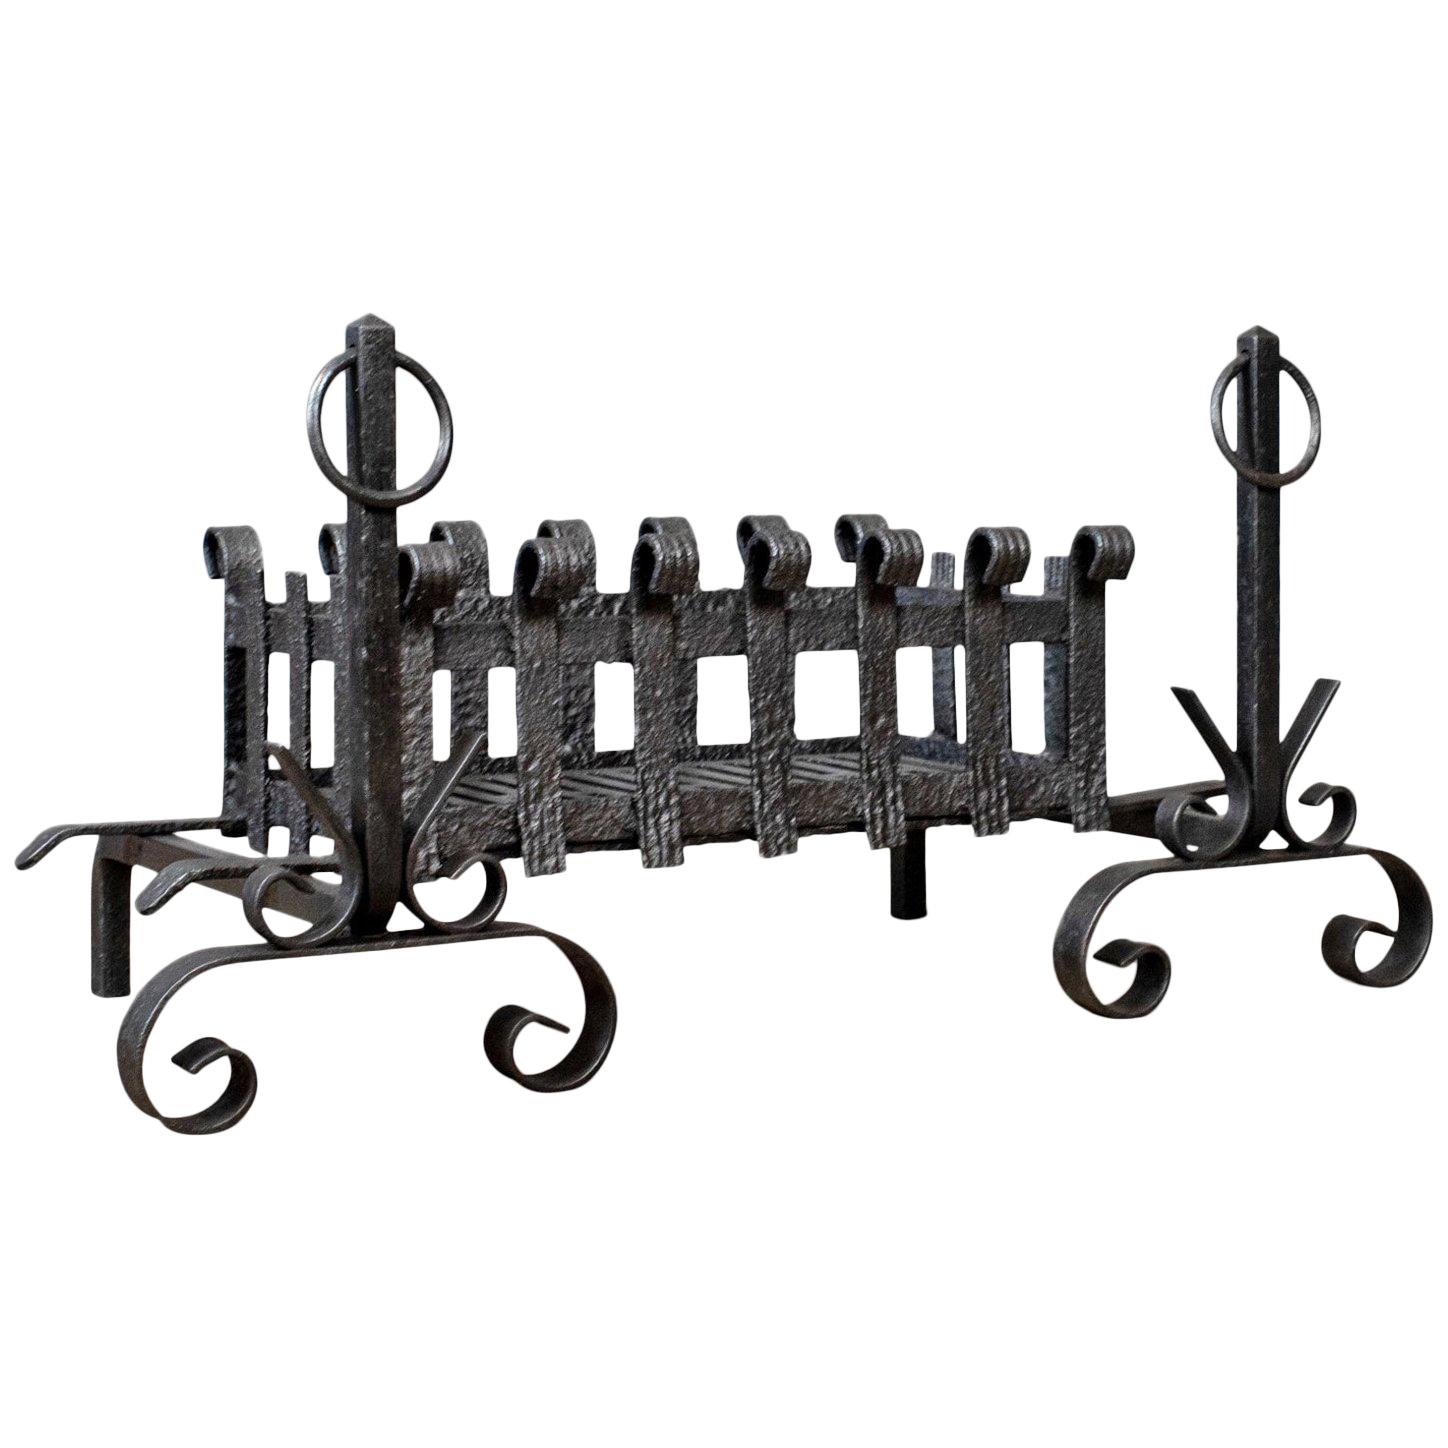 Antique Fire Basket on Andirons, Fire Dogs, English, Fireplace Grate, circa 1900